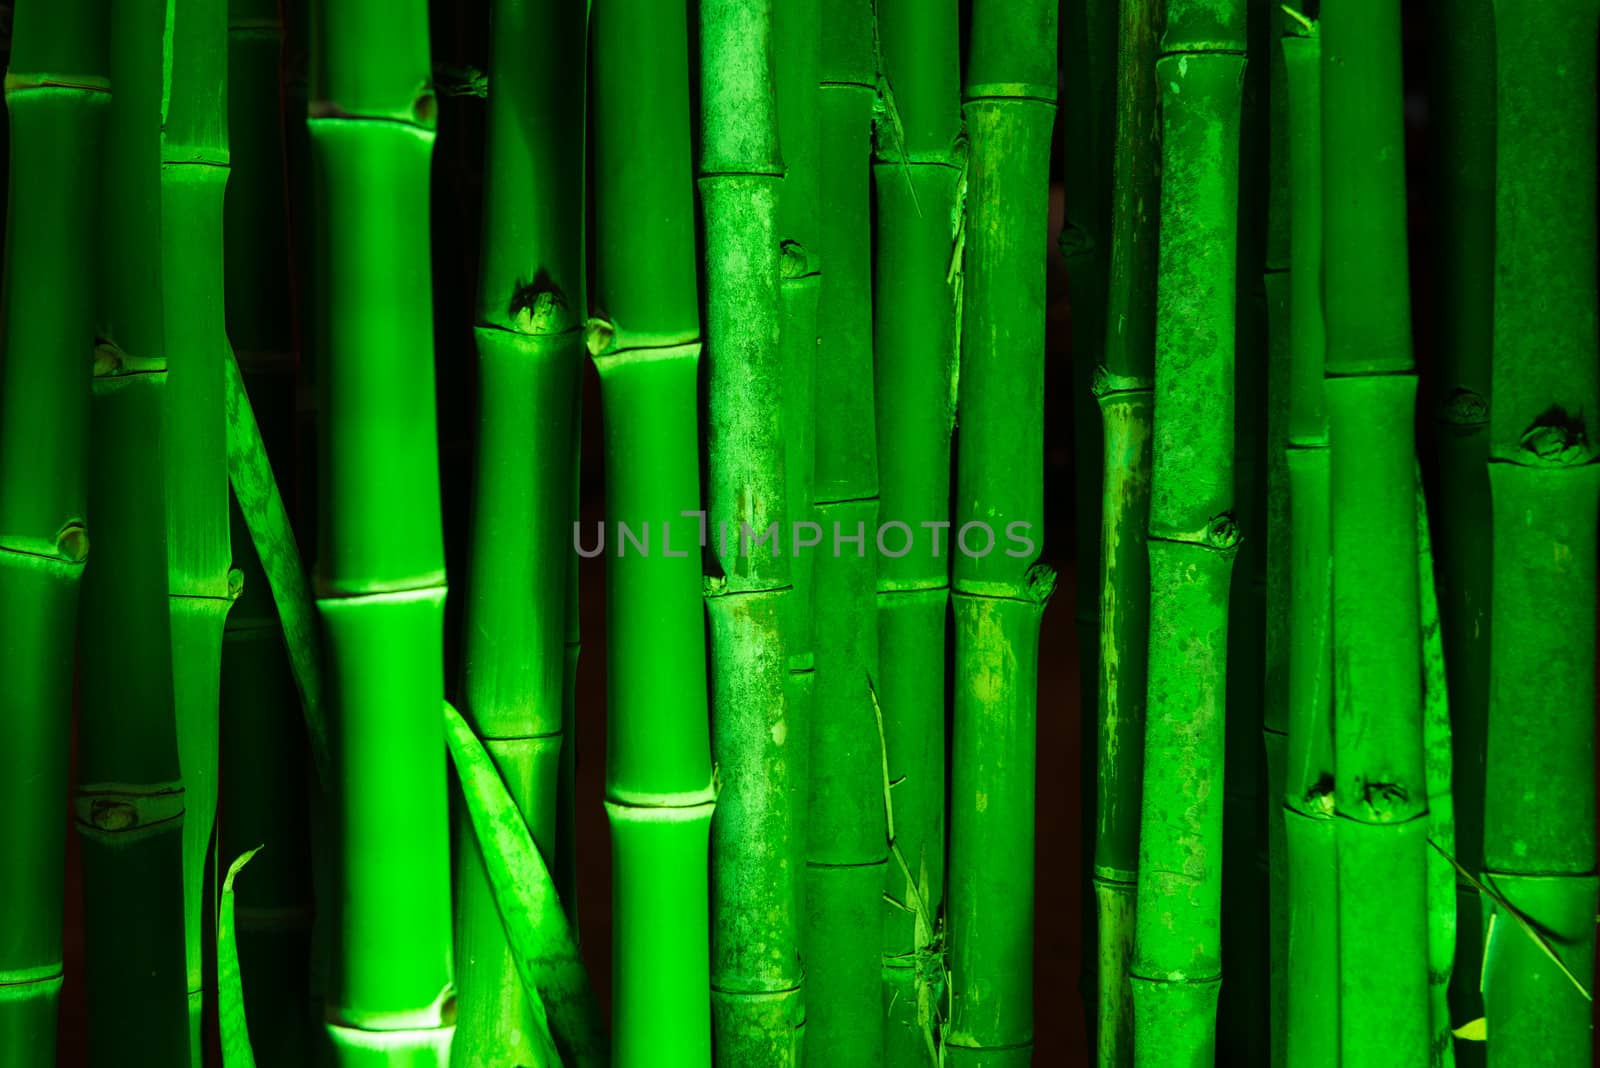 Vertical lines of bamboo illuminated with green light